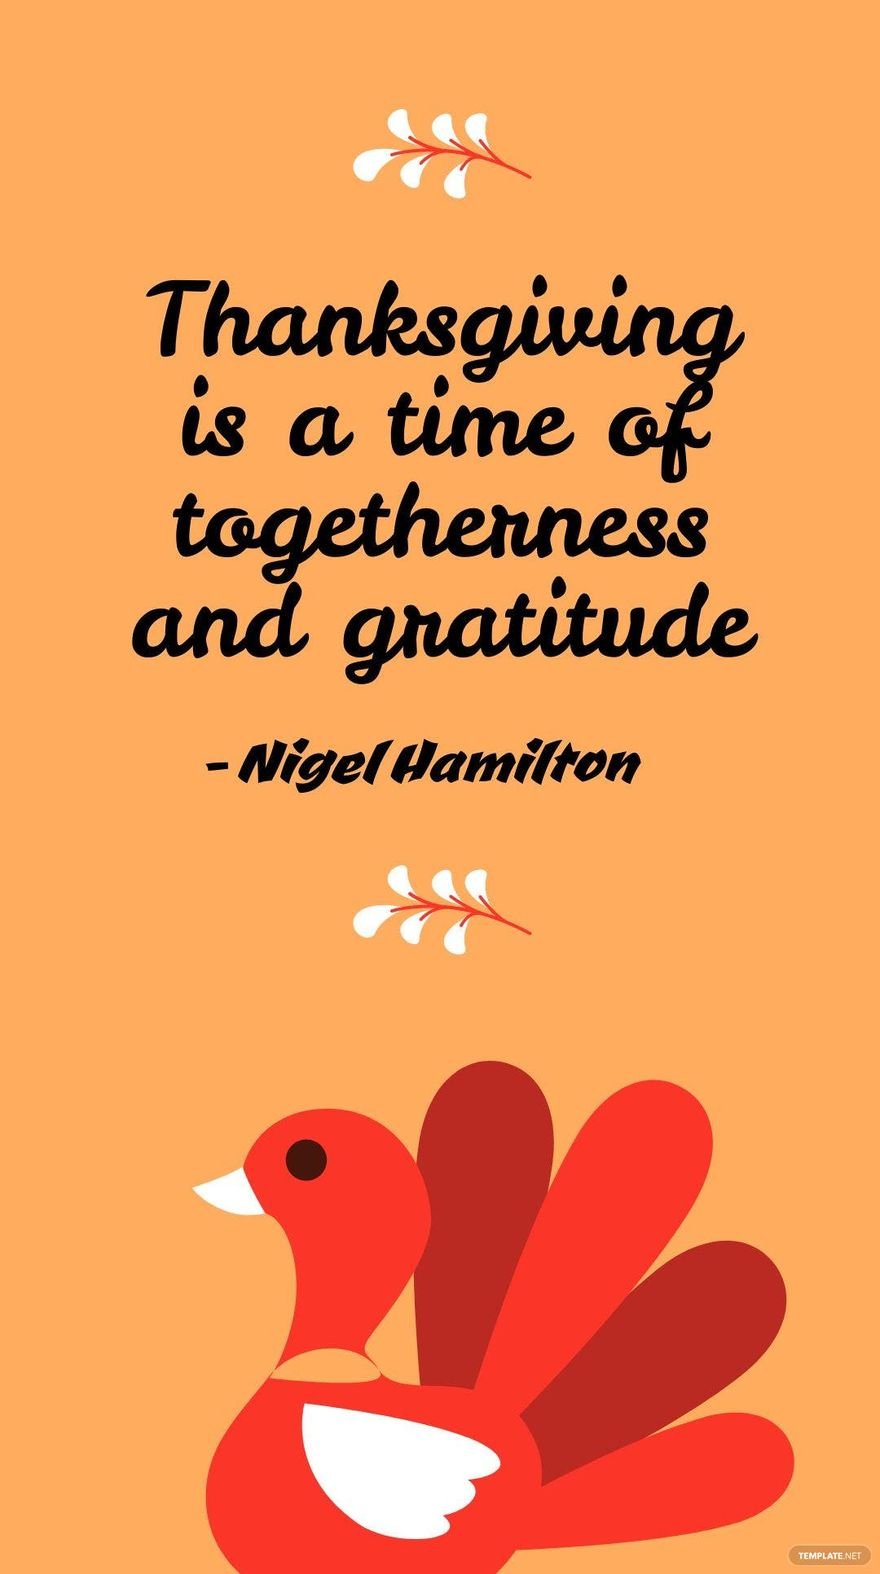 Free Nigel Hamilton - Thanksgiving is a time of togetherness and gratitude in JPG